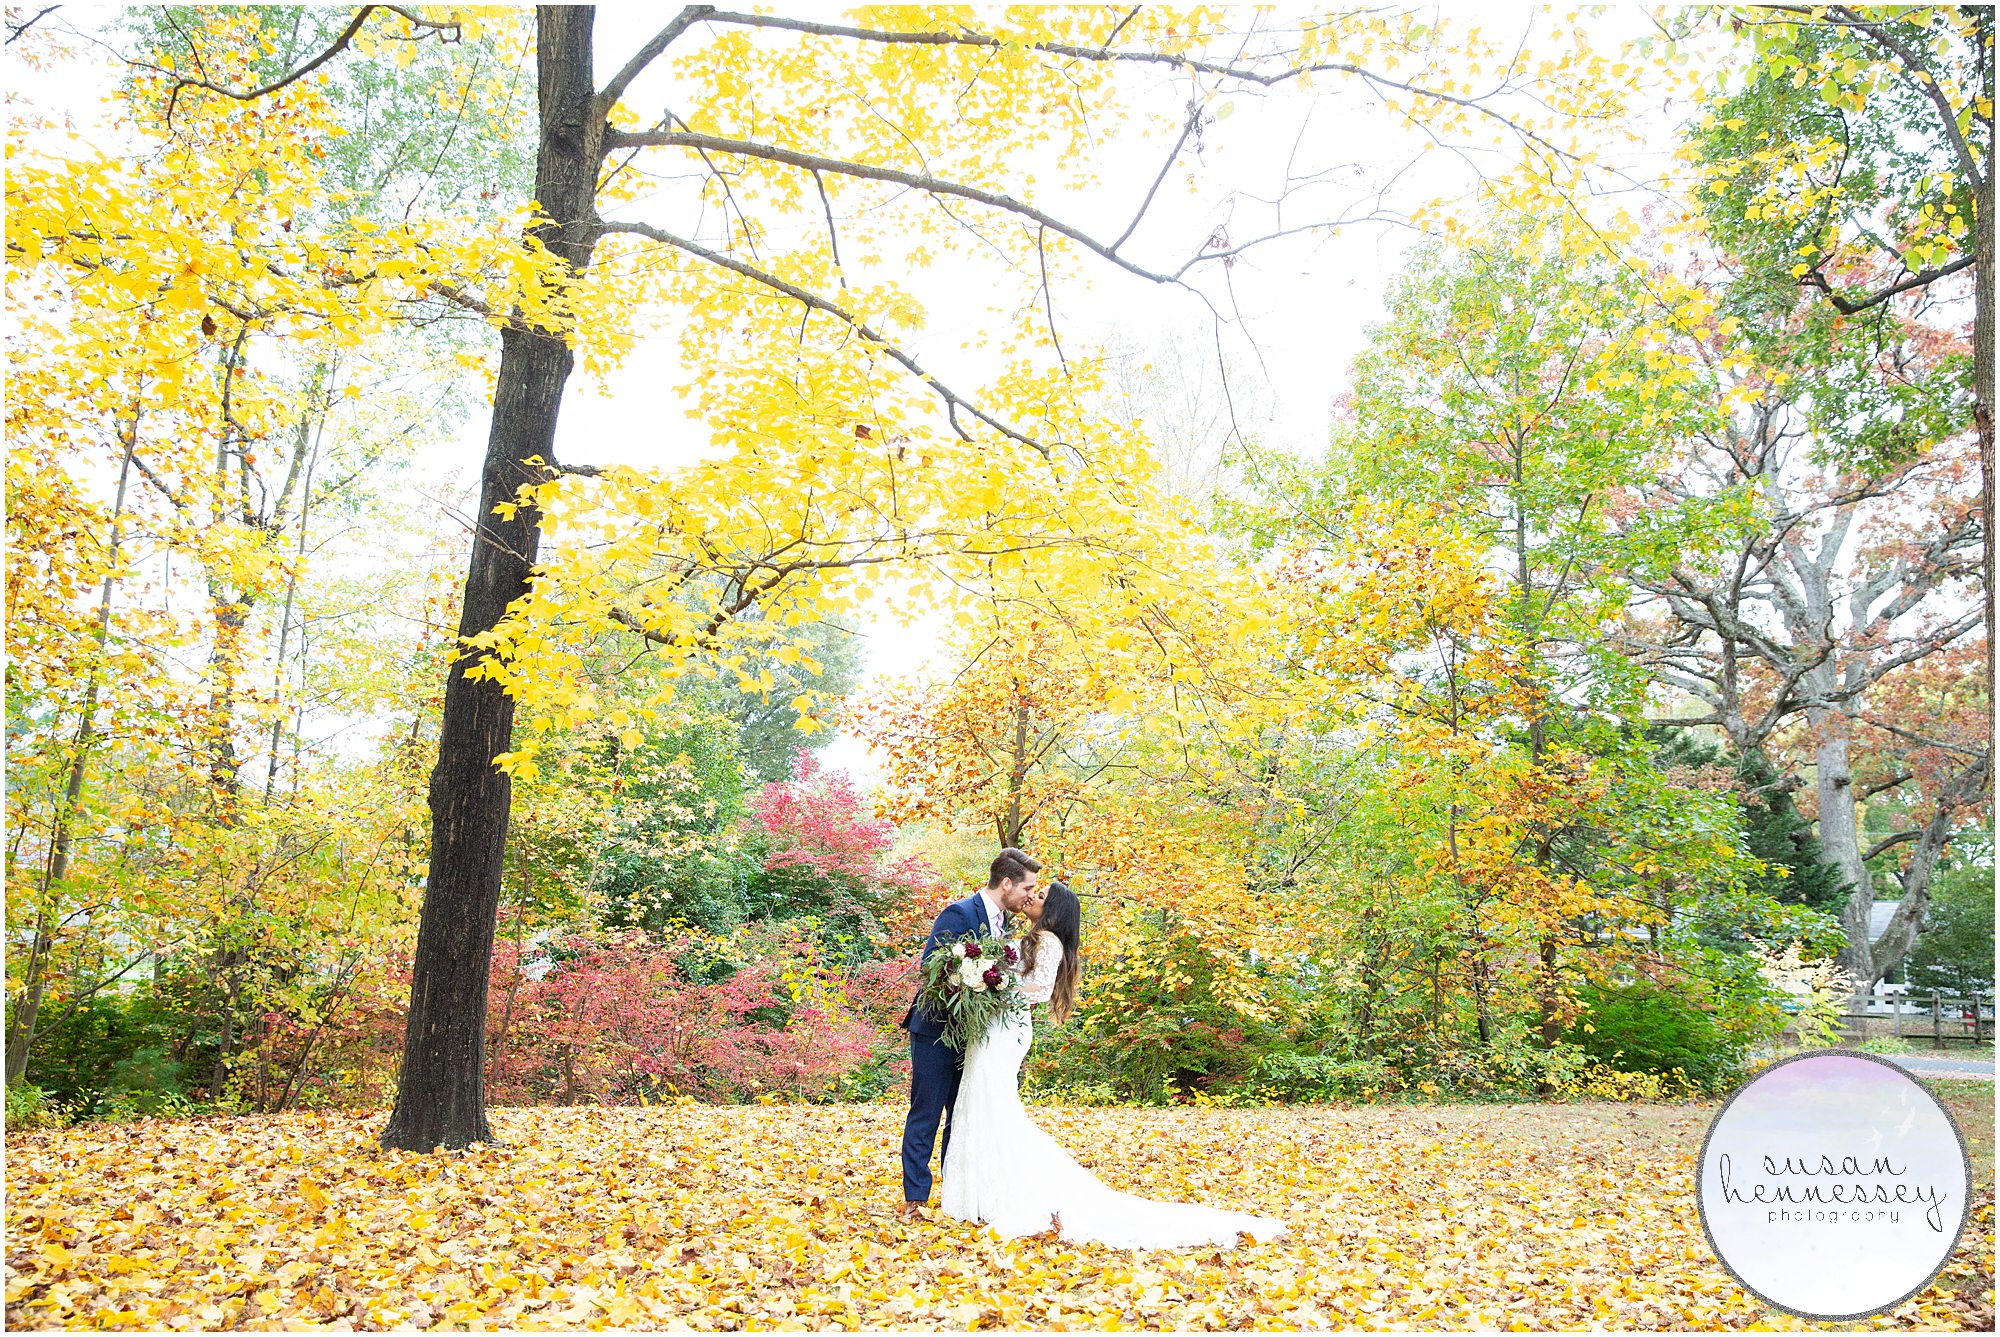 Fiza and Thomas had a South Jersey Microwedding with a church ceremony in Marlton and portraits with peak foliage in Strawbridge Lake Park